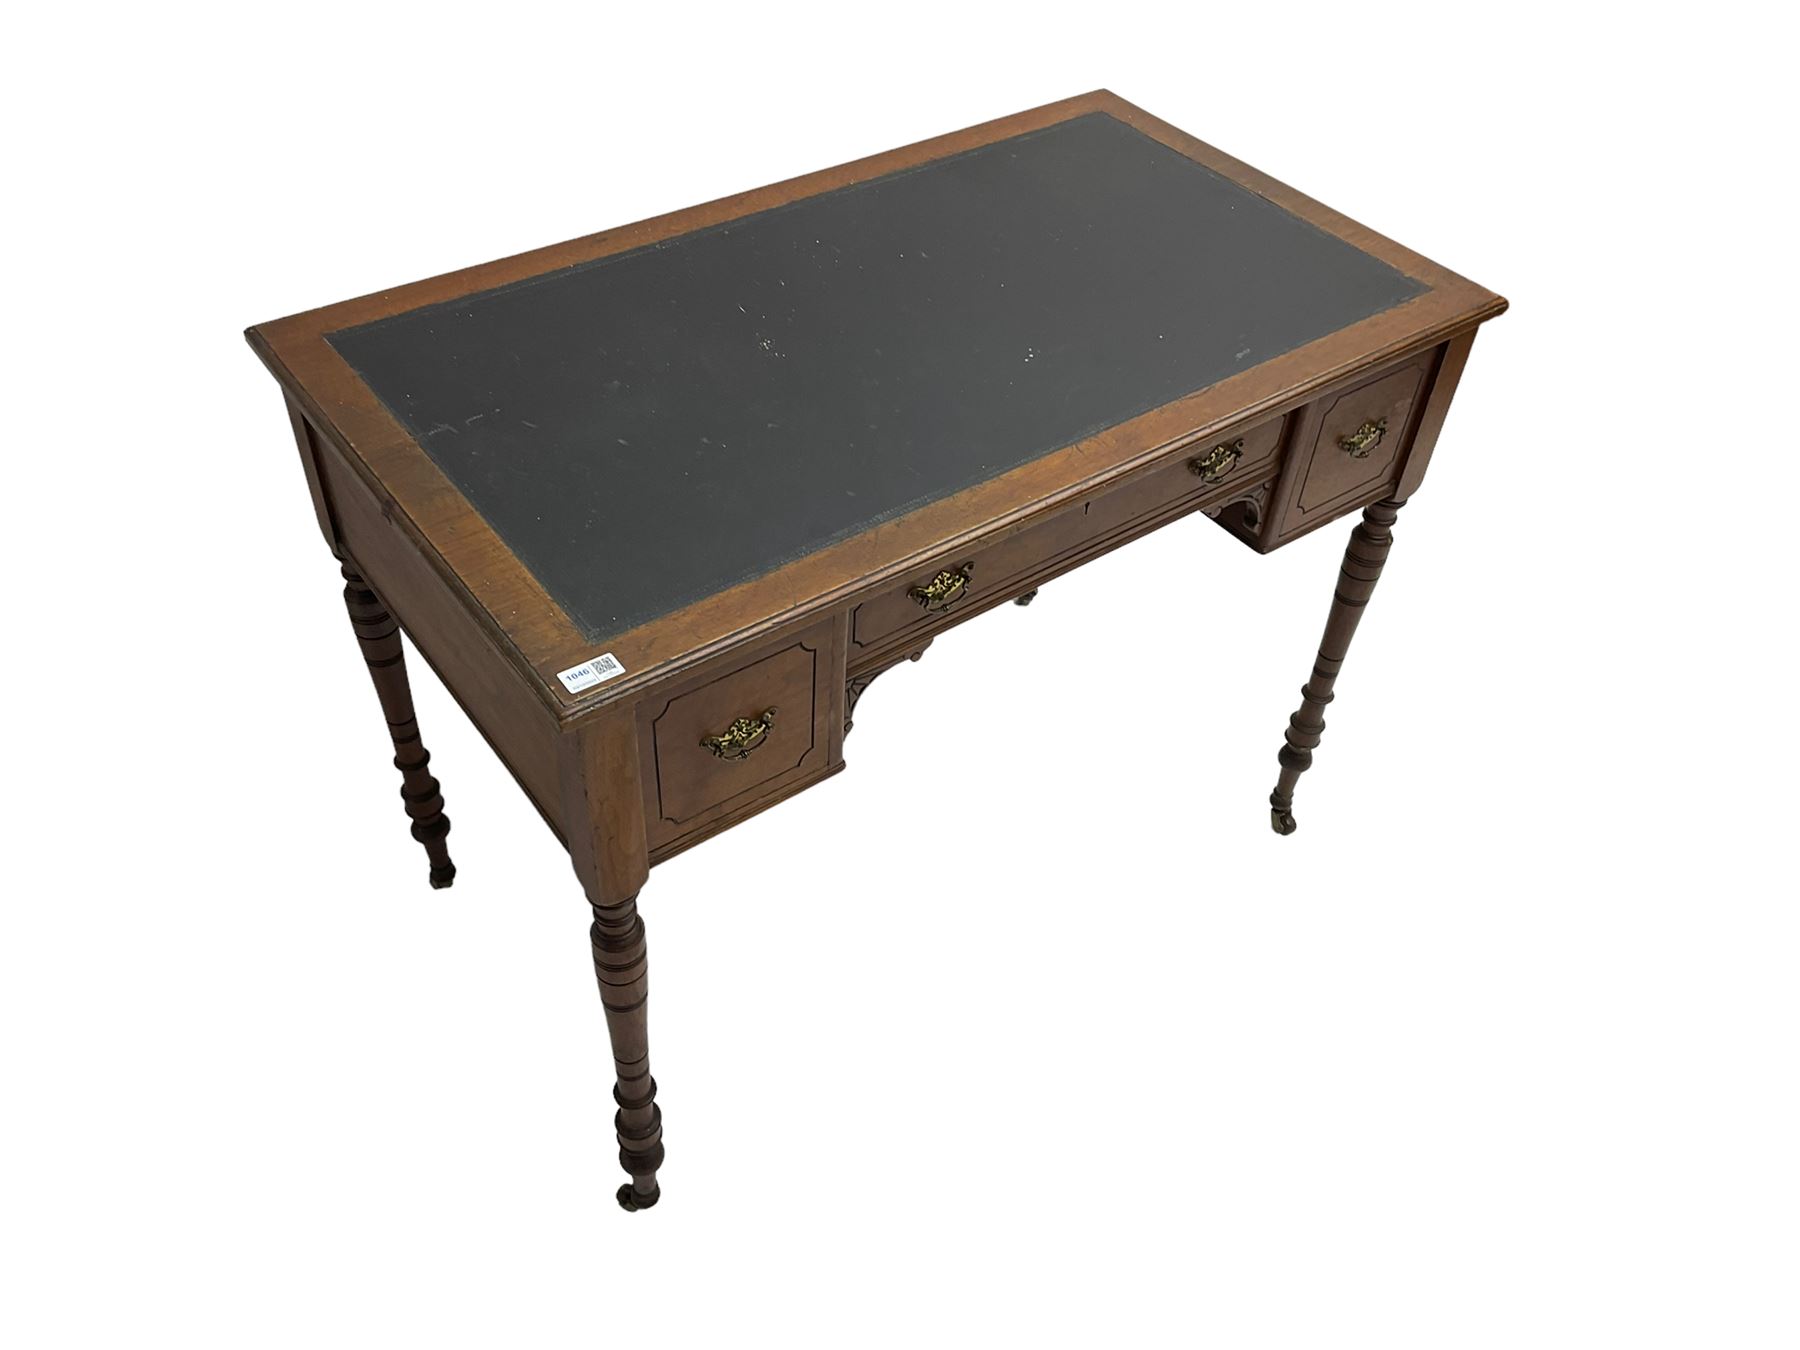 Late 19th century walnut writing table or desk - Image 5 of 6